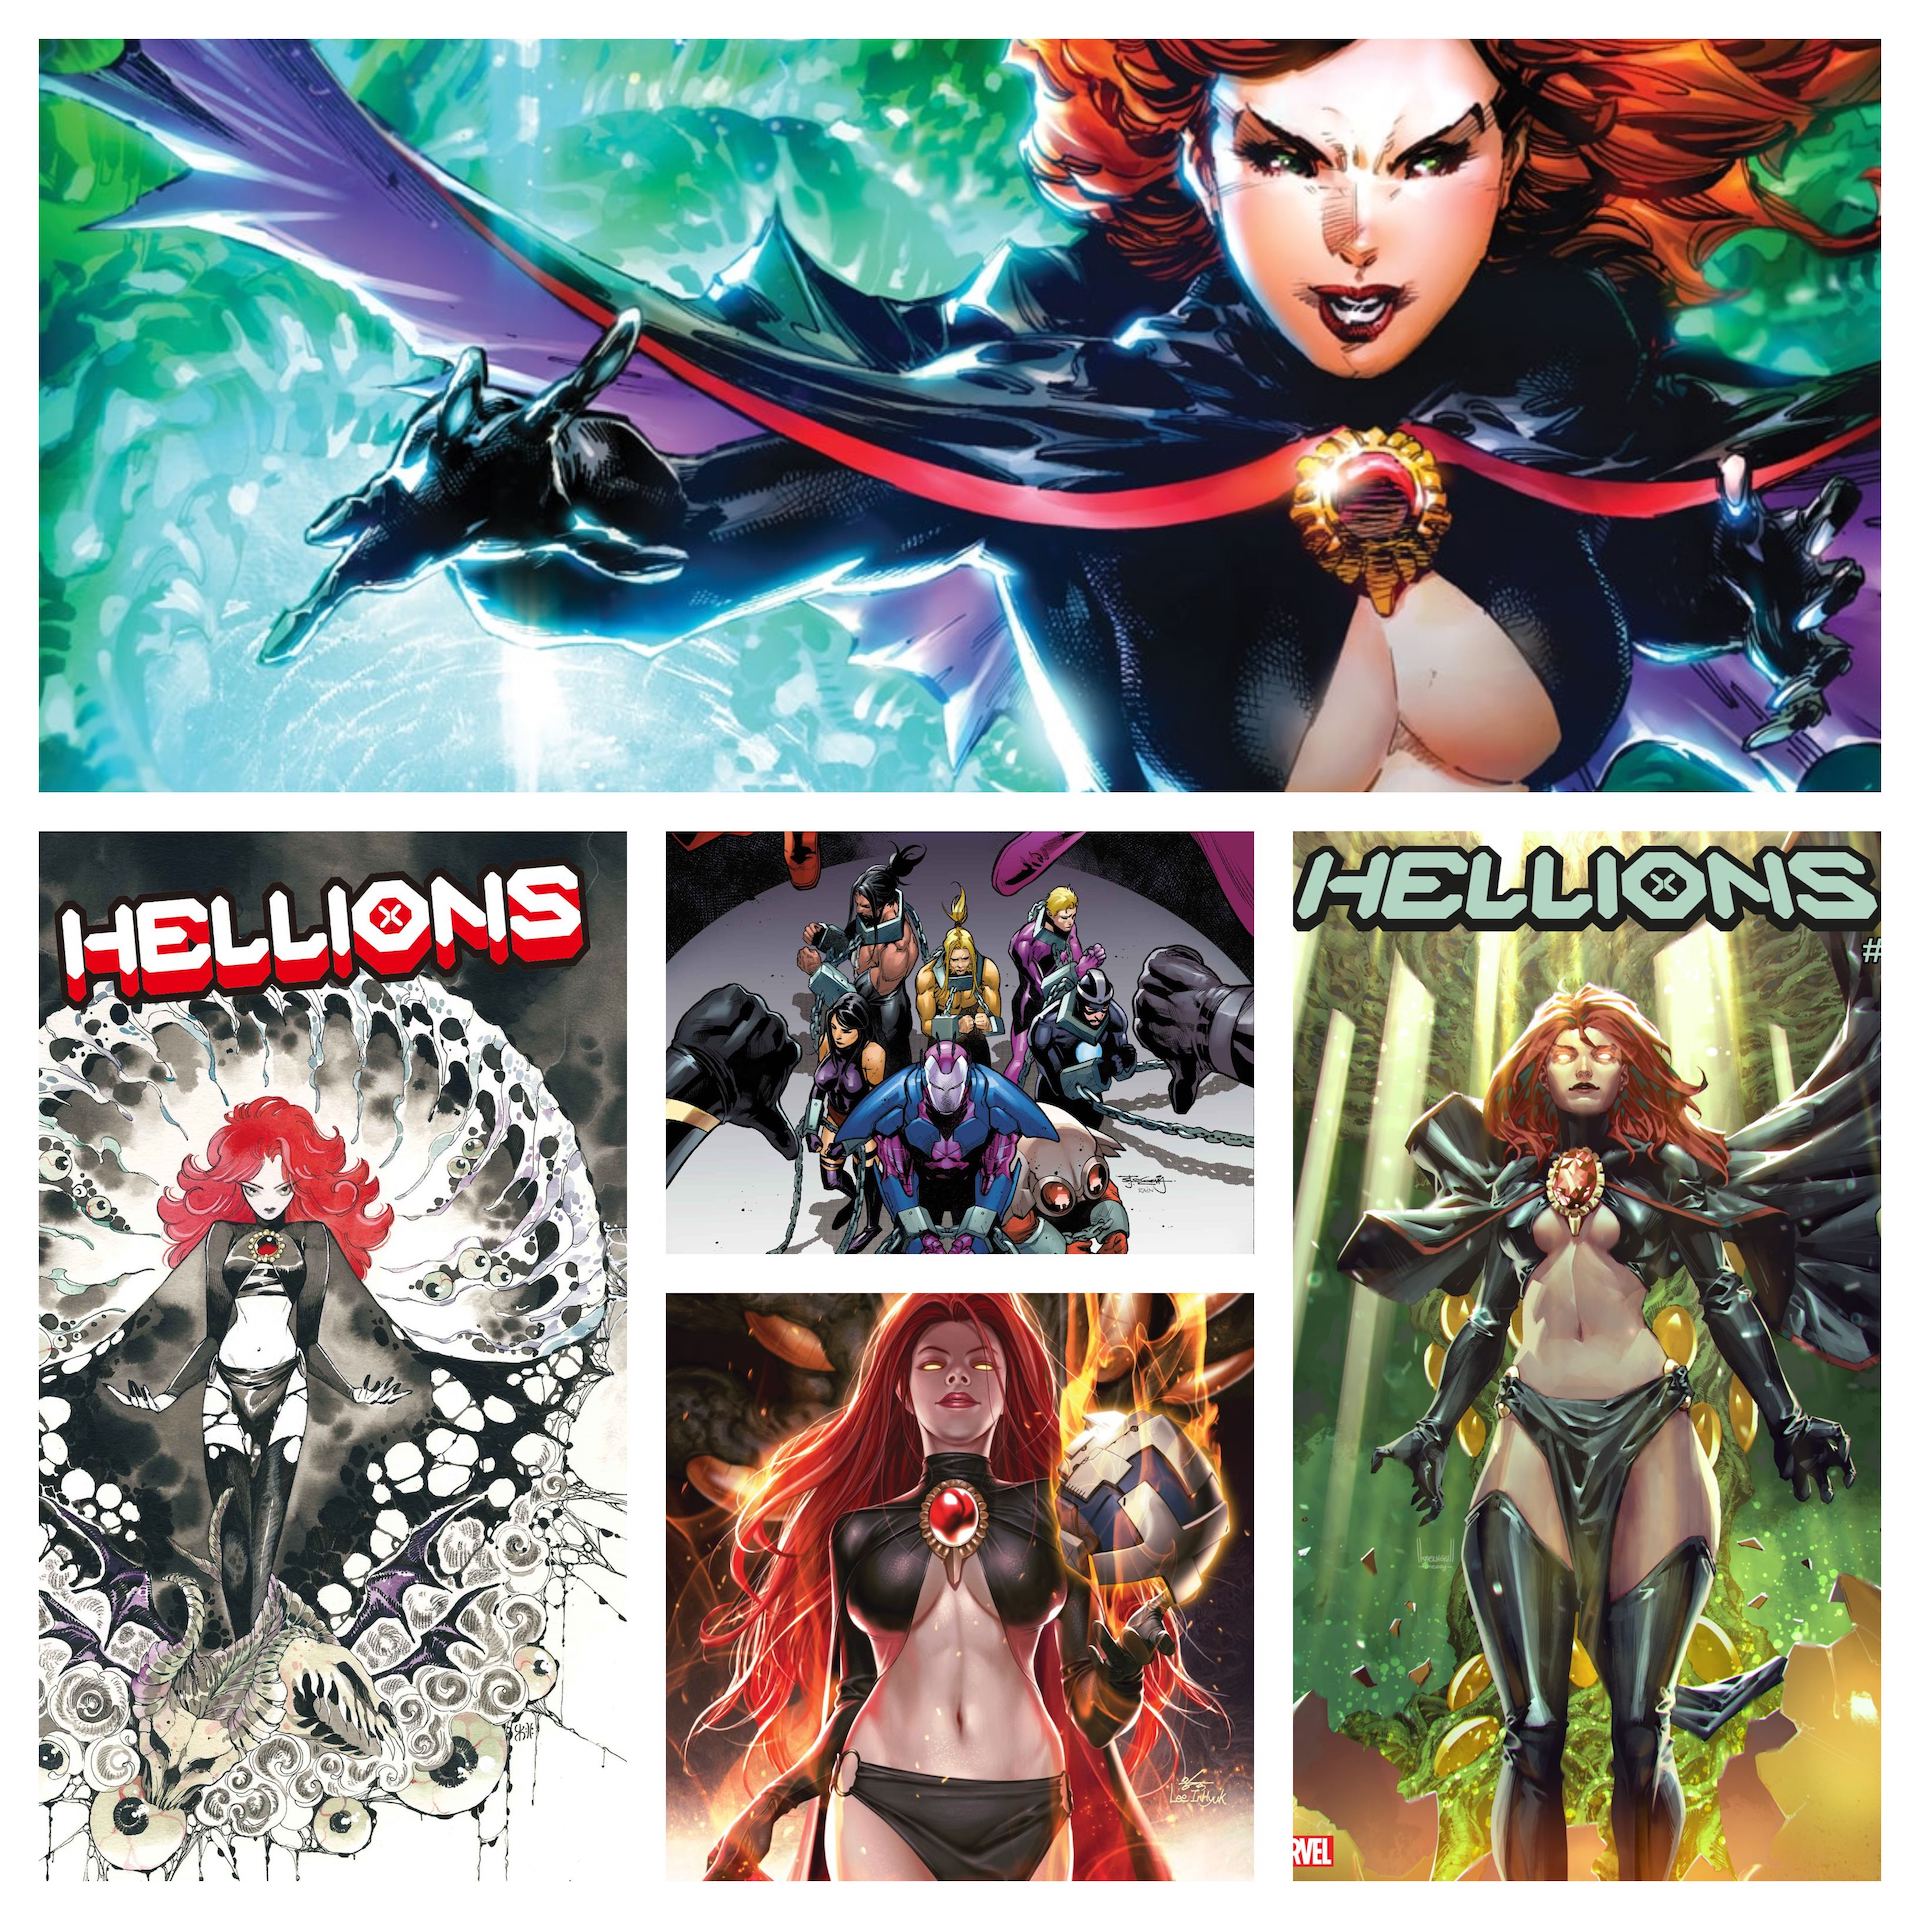 Madelyne Pryor takes over 'Hellions' #18 with newly revealed X-Men covers